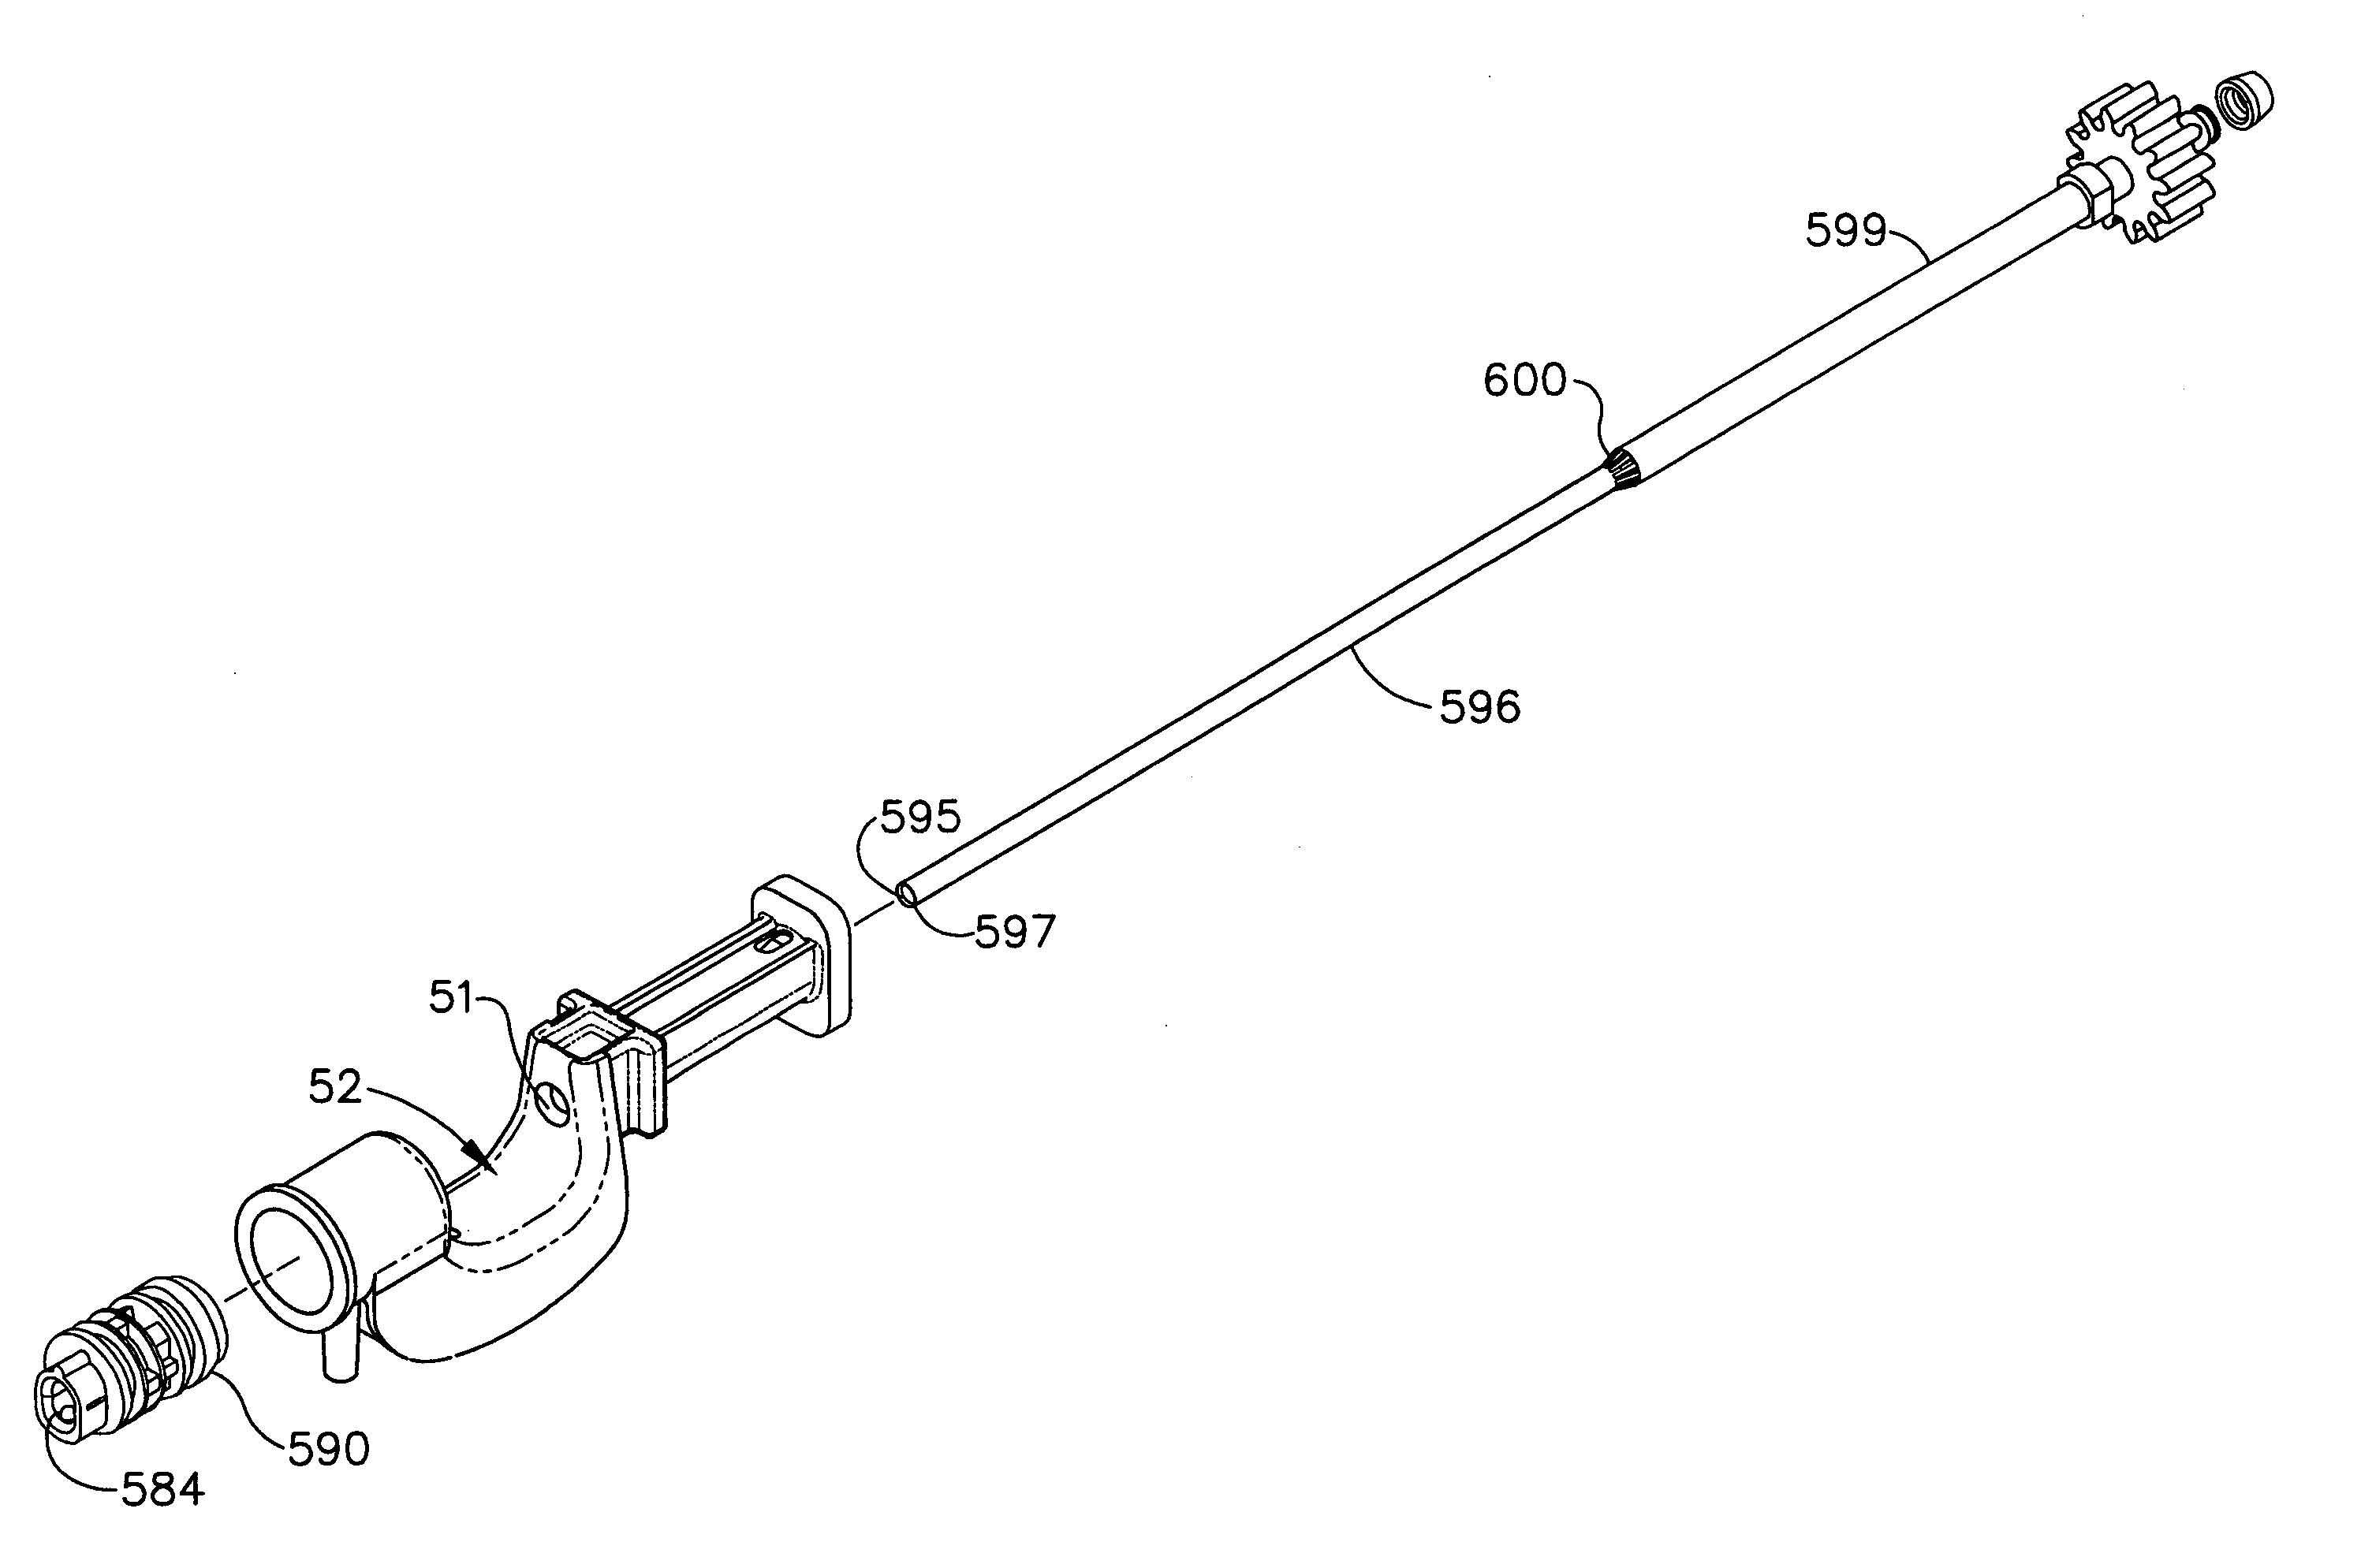 Surgical biopsy device having automatic rotation of the probe for taking multiple samples